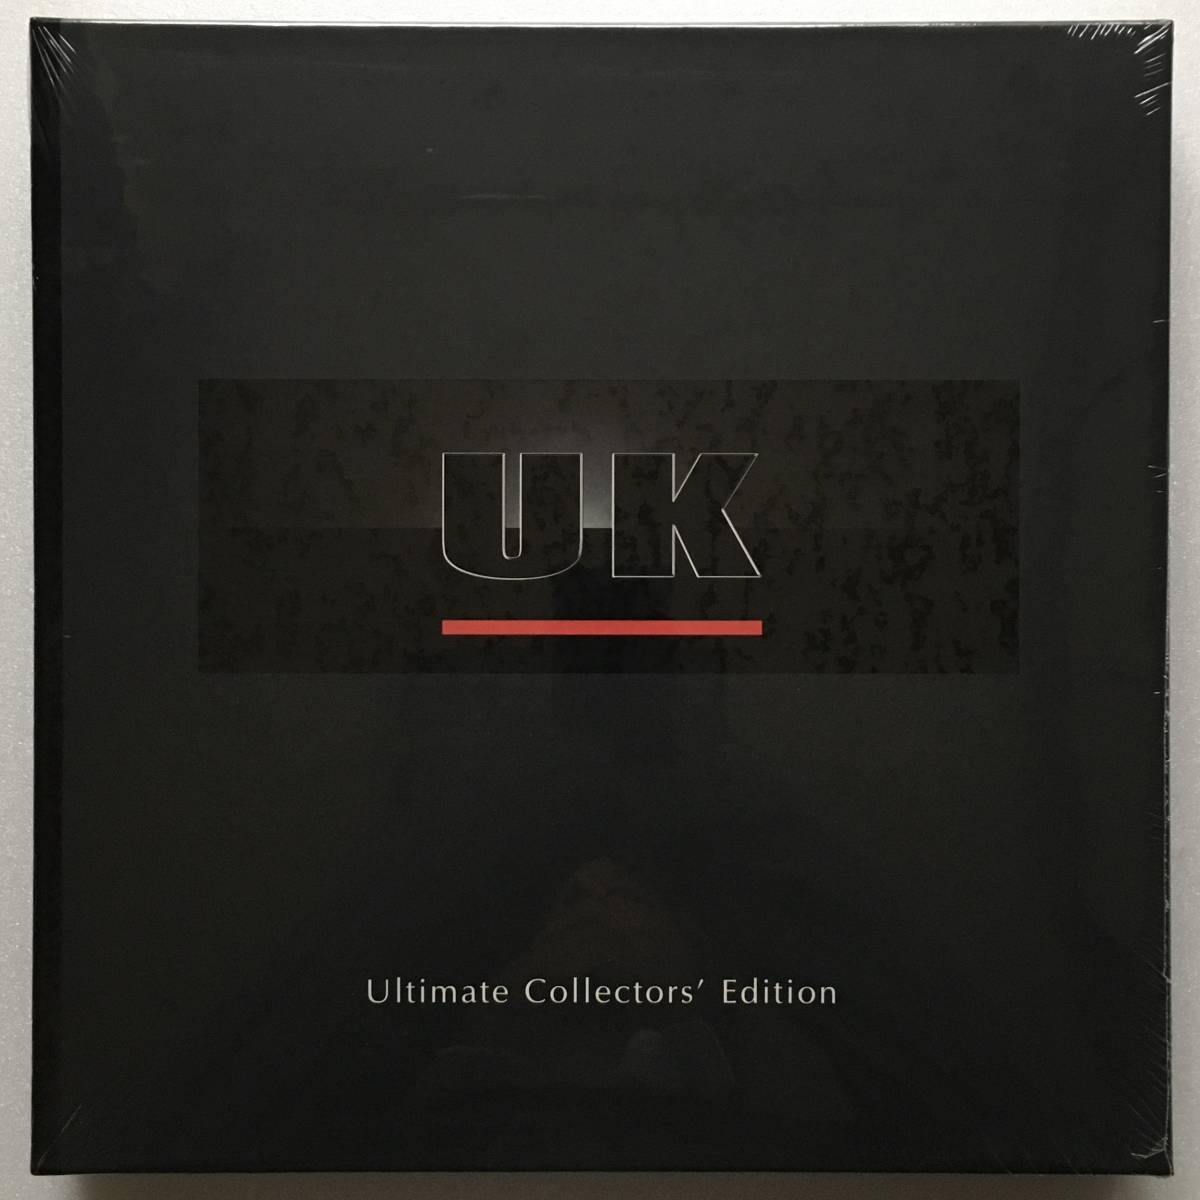 UK「ULTIMATE COLLECTORS’ EDITION」GLOBE MUSIC 2016年 14CD＋4BLU-RAY＋64P BOOKLET BOX SET LIMITED EDITION シールド未開封